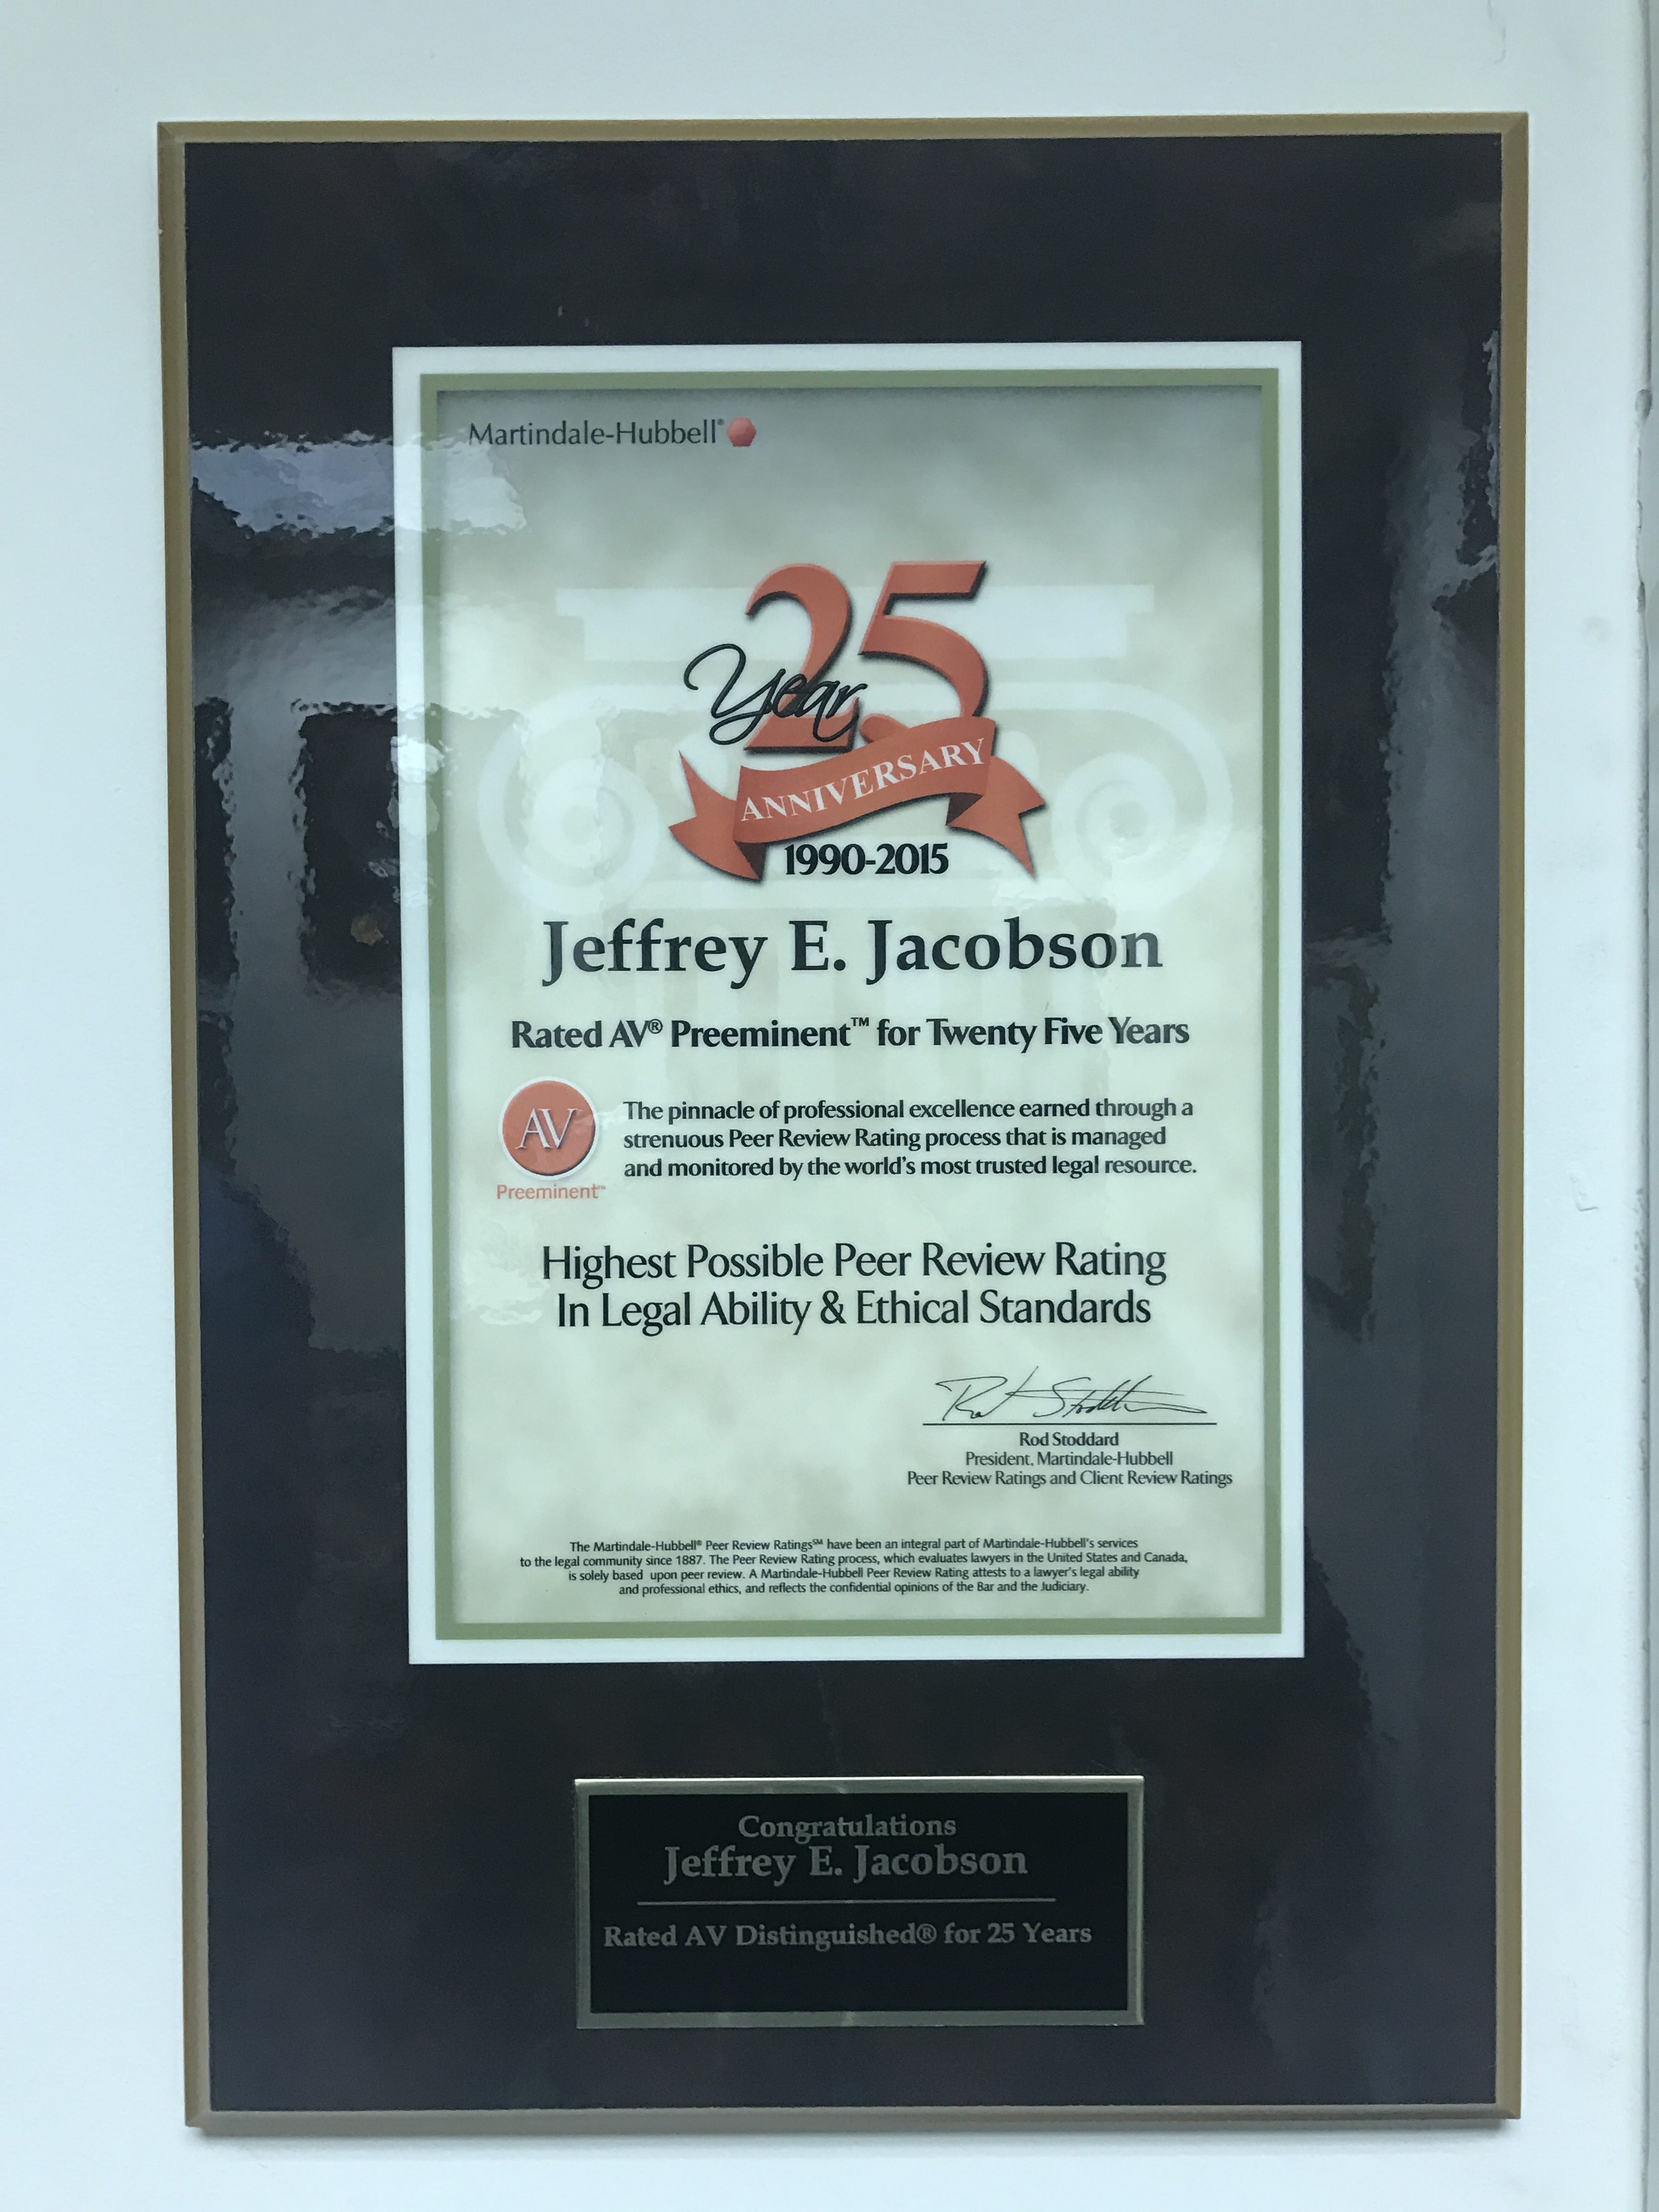 Jeffrey E. Jacobson received 25th Anniversary AV Rated